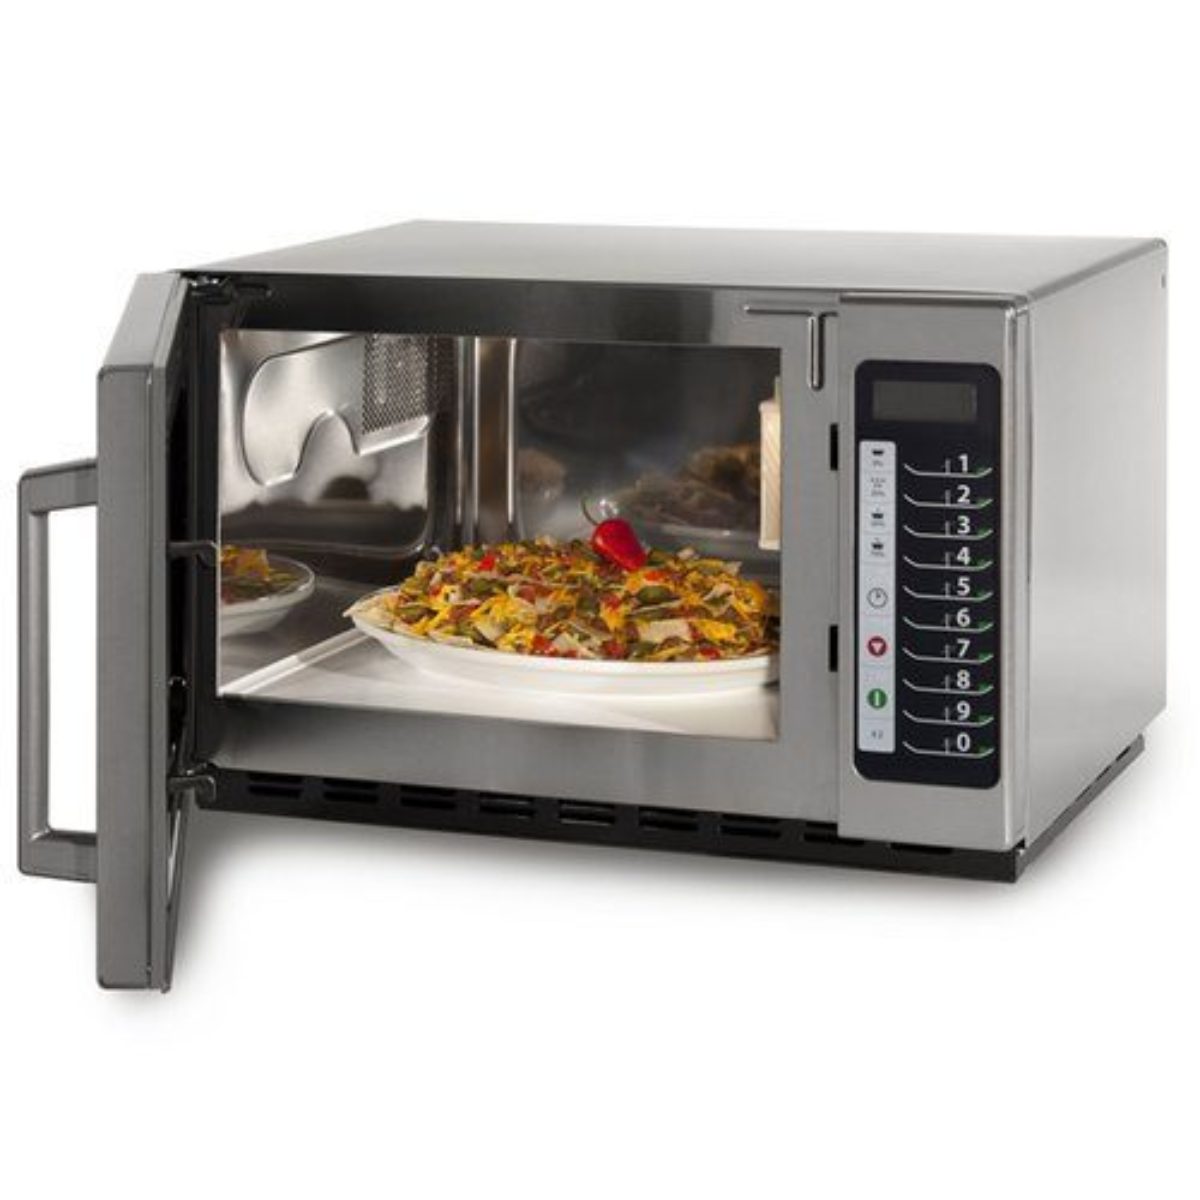 menumaster commercial microwave oven india